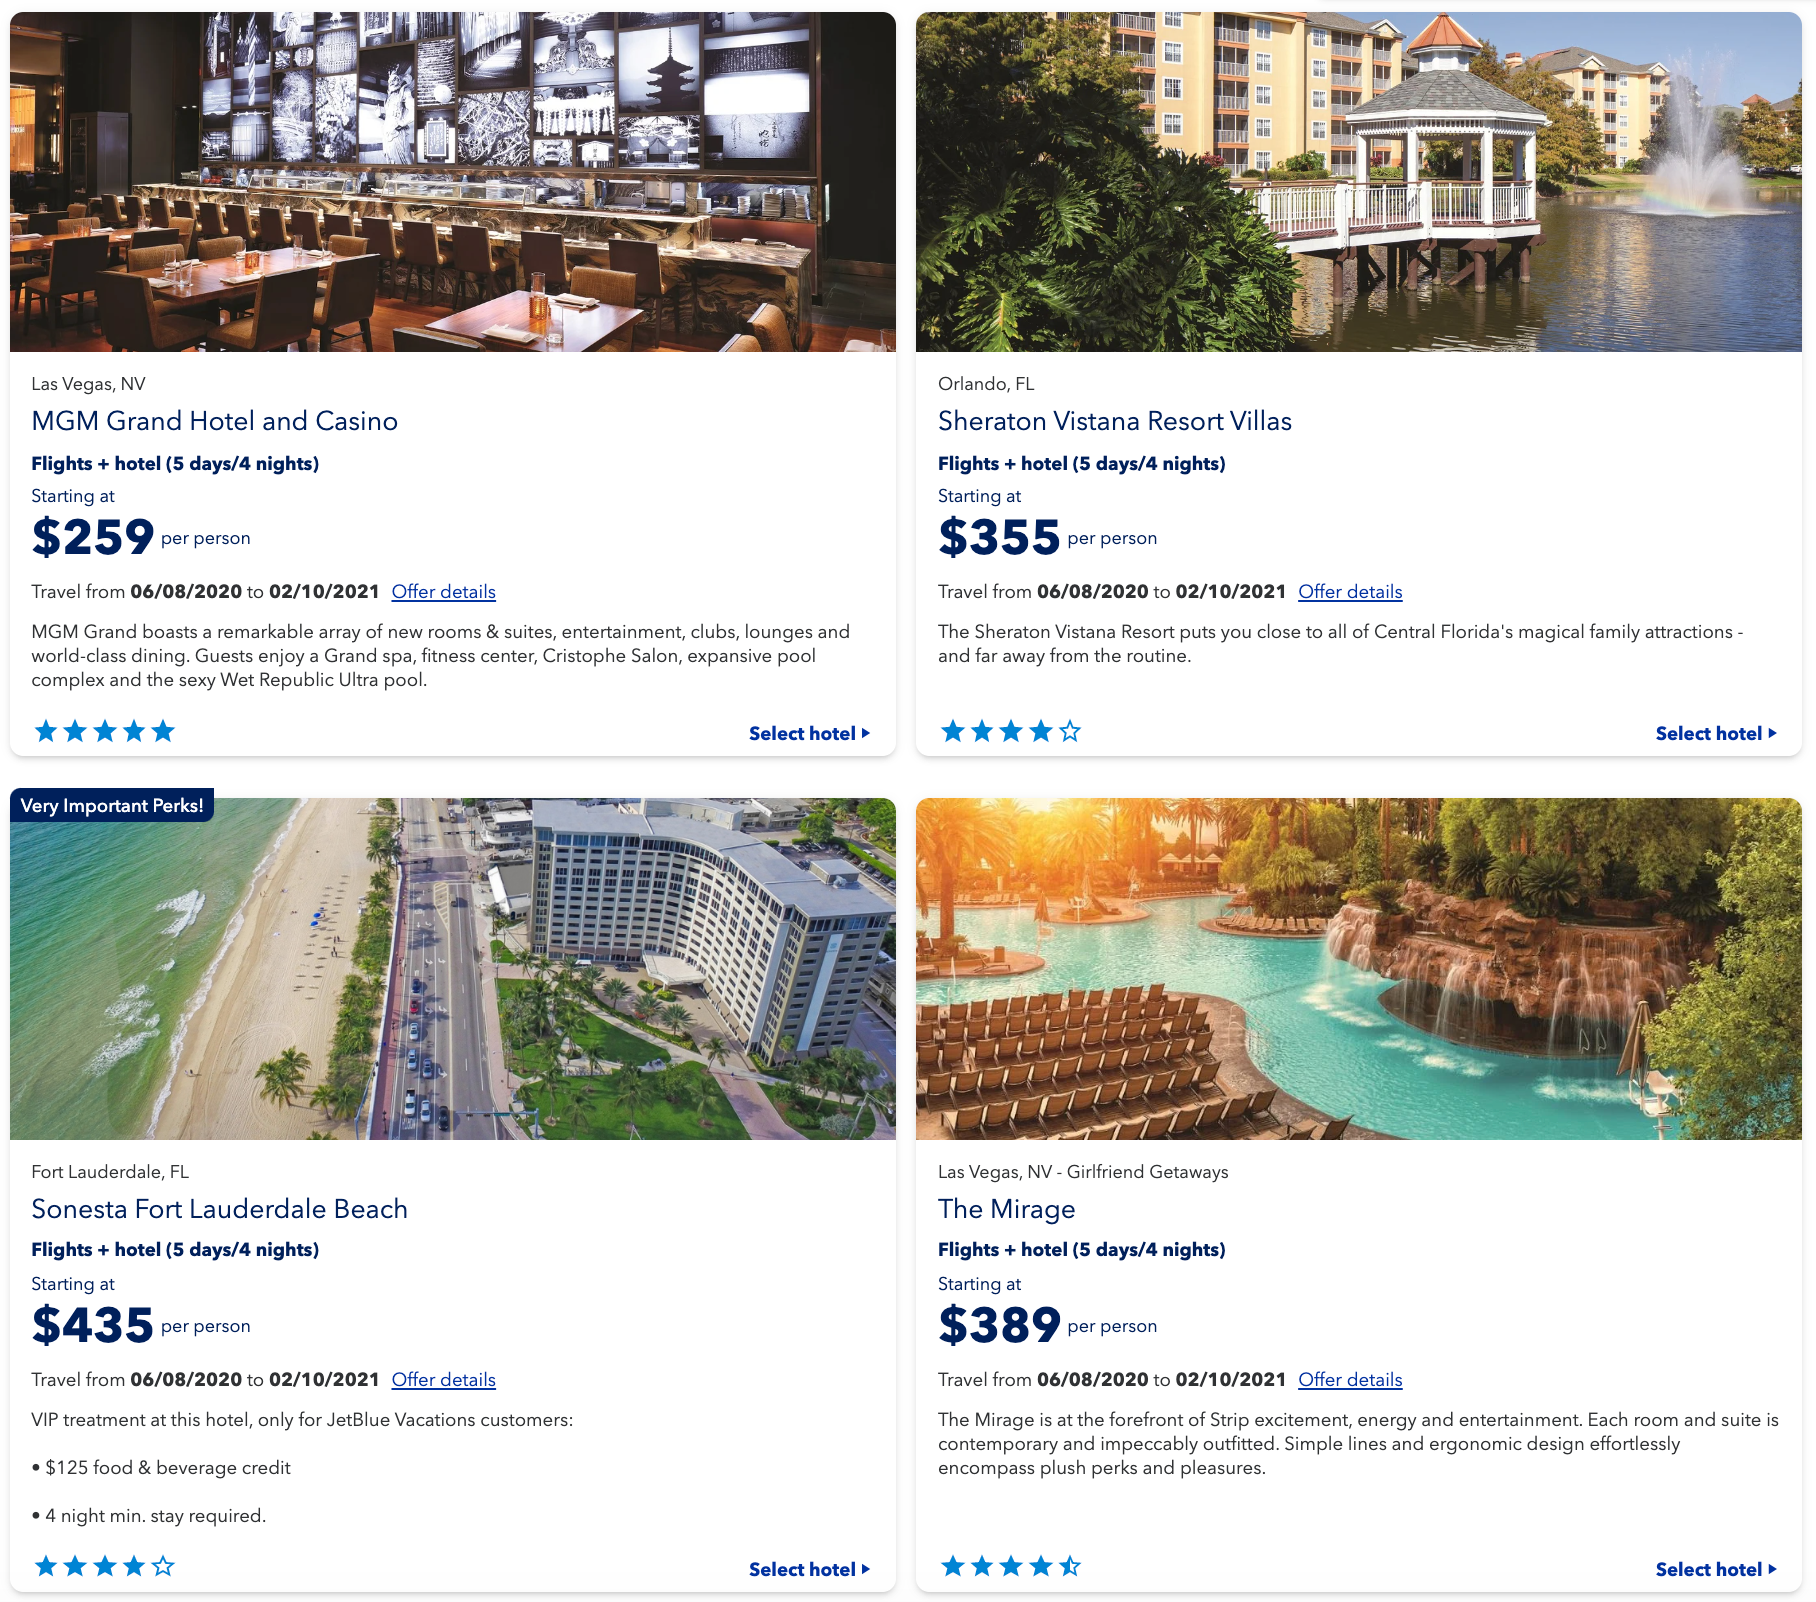 jetblue vacation packages